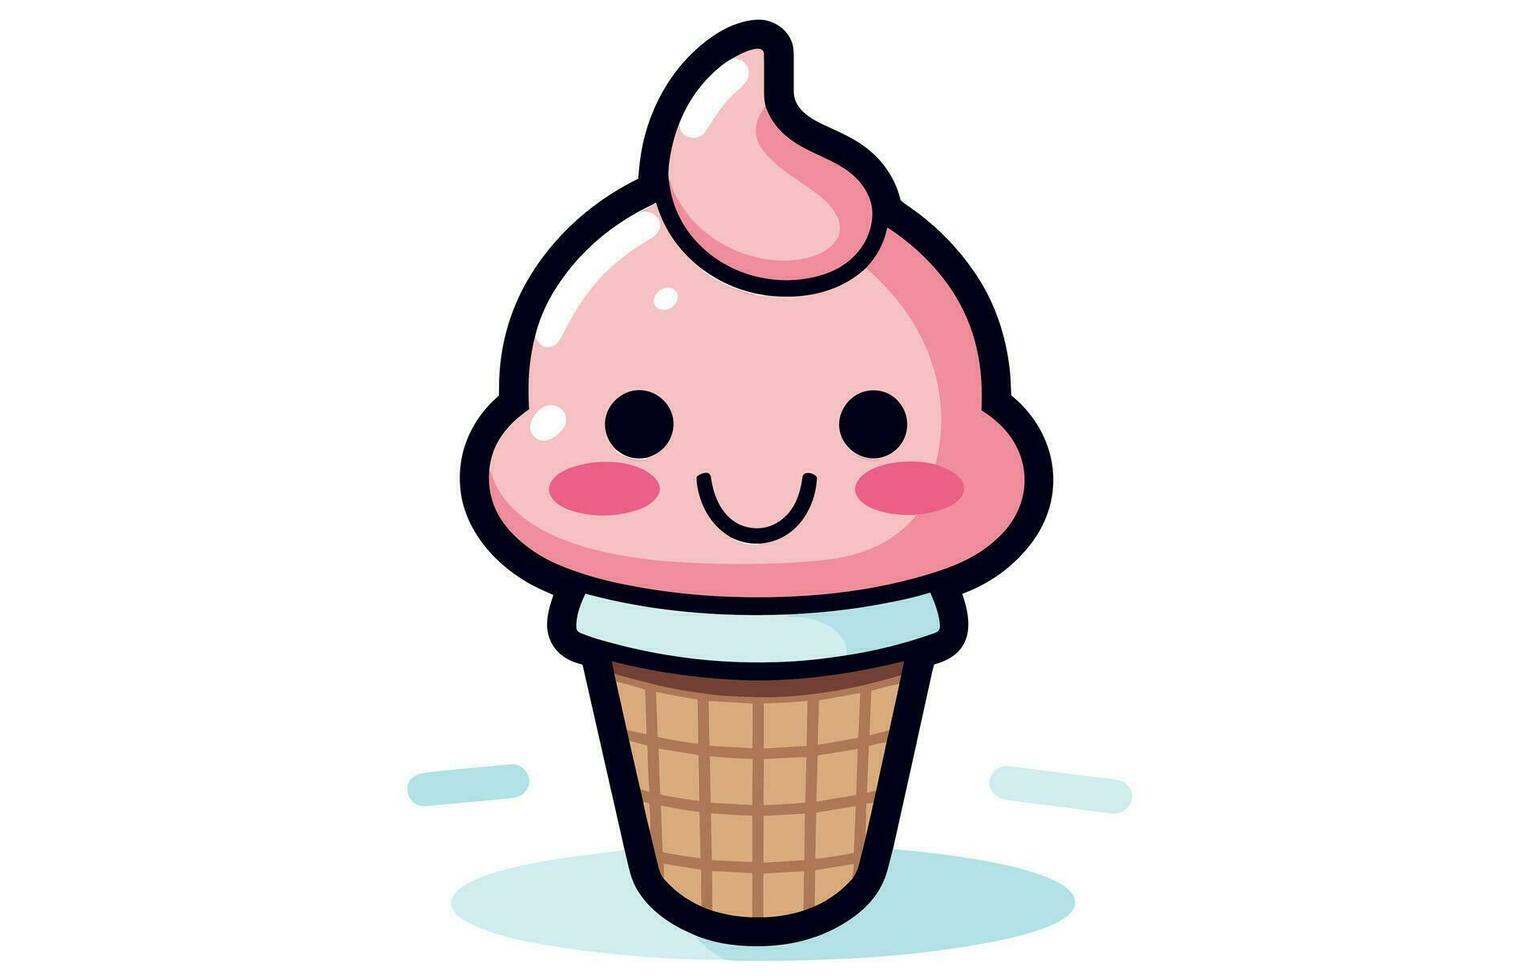 vector character of cute ice cream. smile cartoon character art, Cartoon kawaii ice cream cone